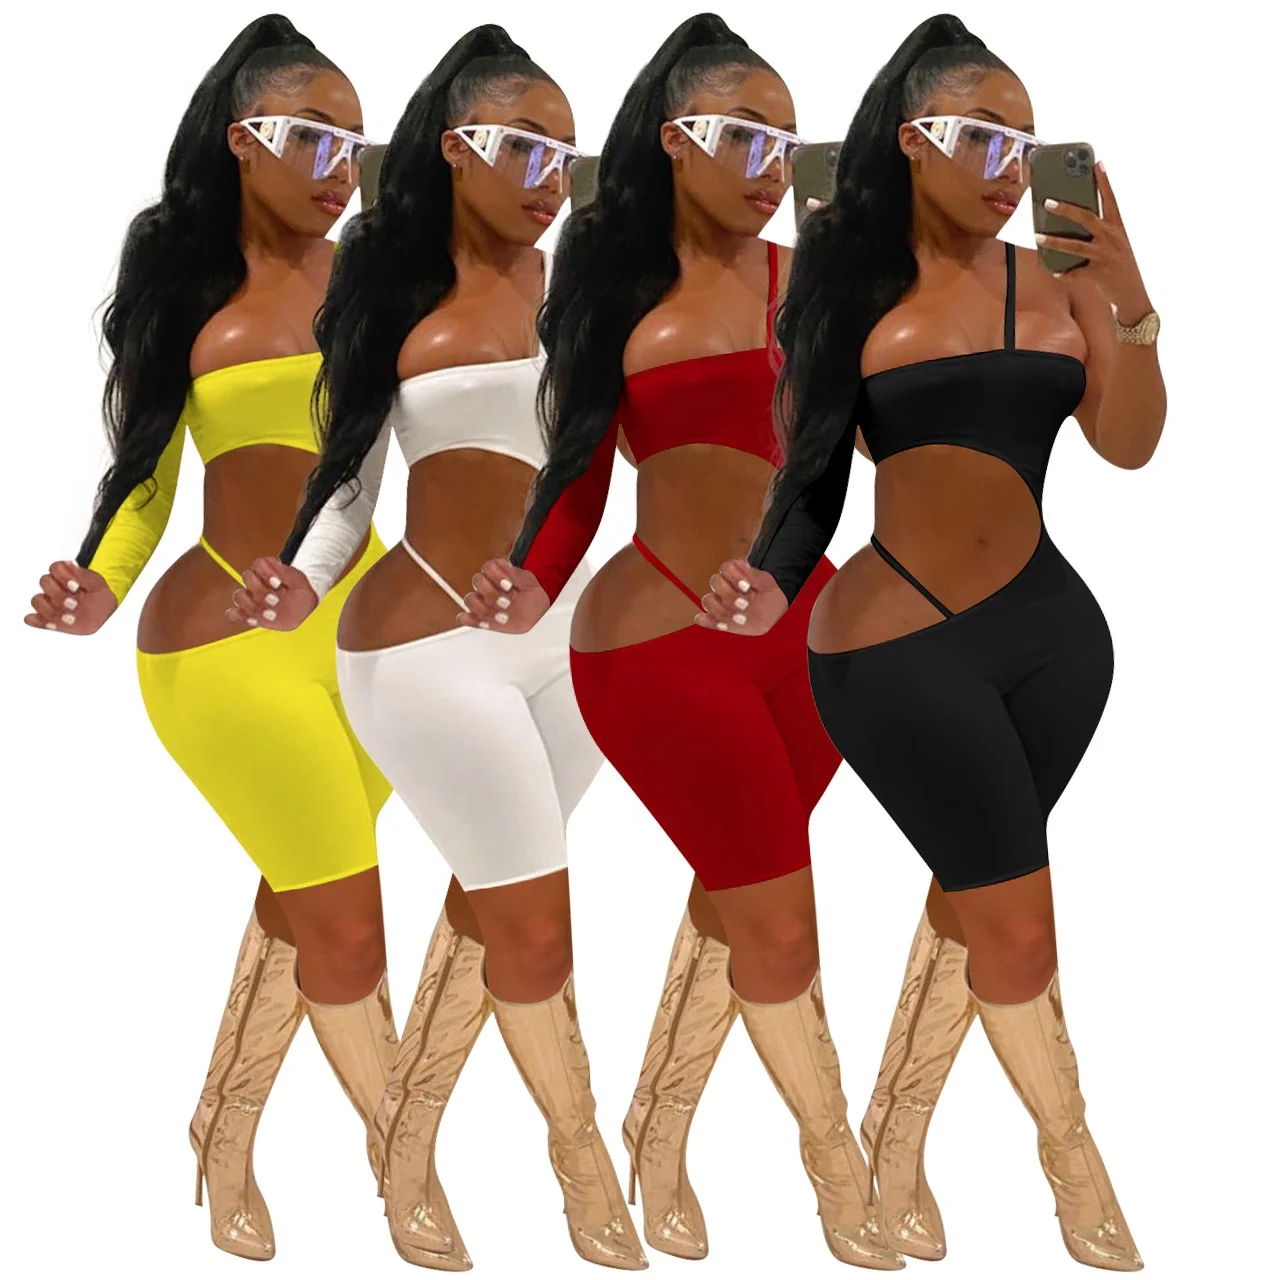 

LANOZY Summer Temperament Strapless Jumpsuit Crop Hollow Out Sexy Girl NightClub Bodycon One Piece Jumpsuit, White,yellow,red,black